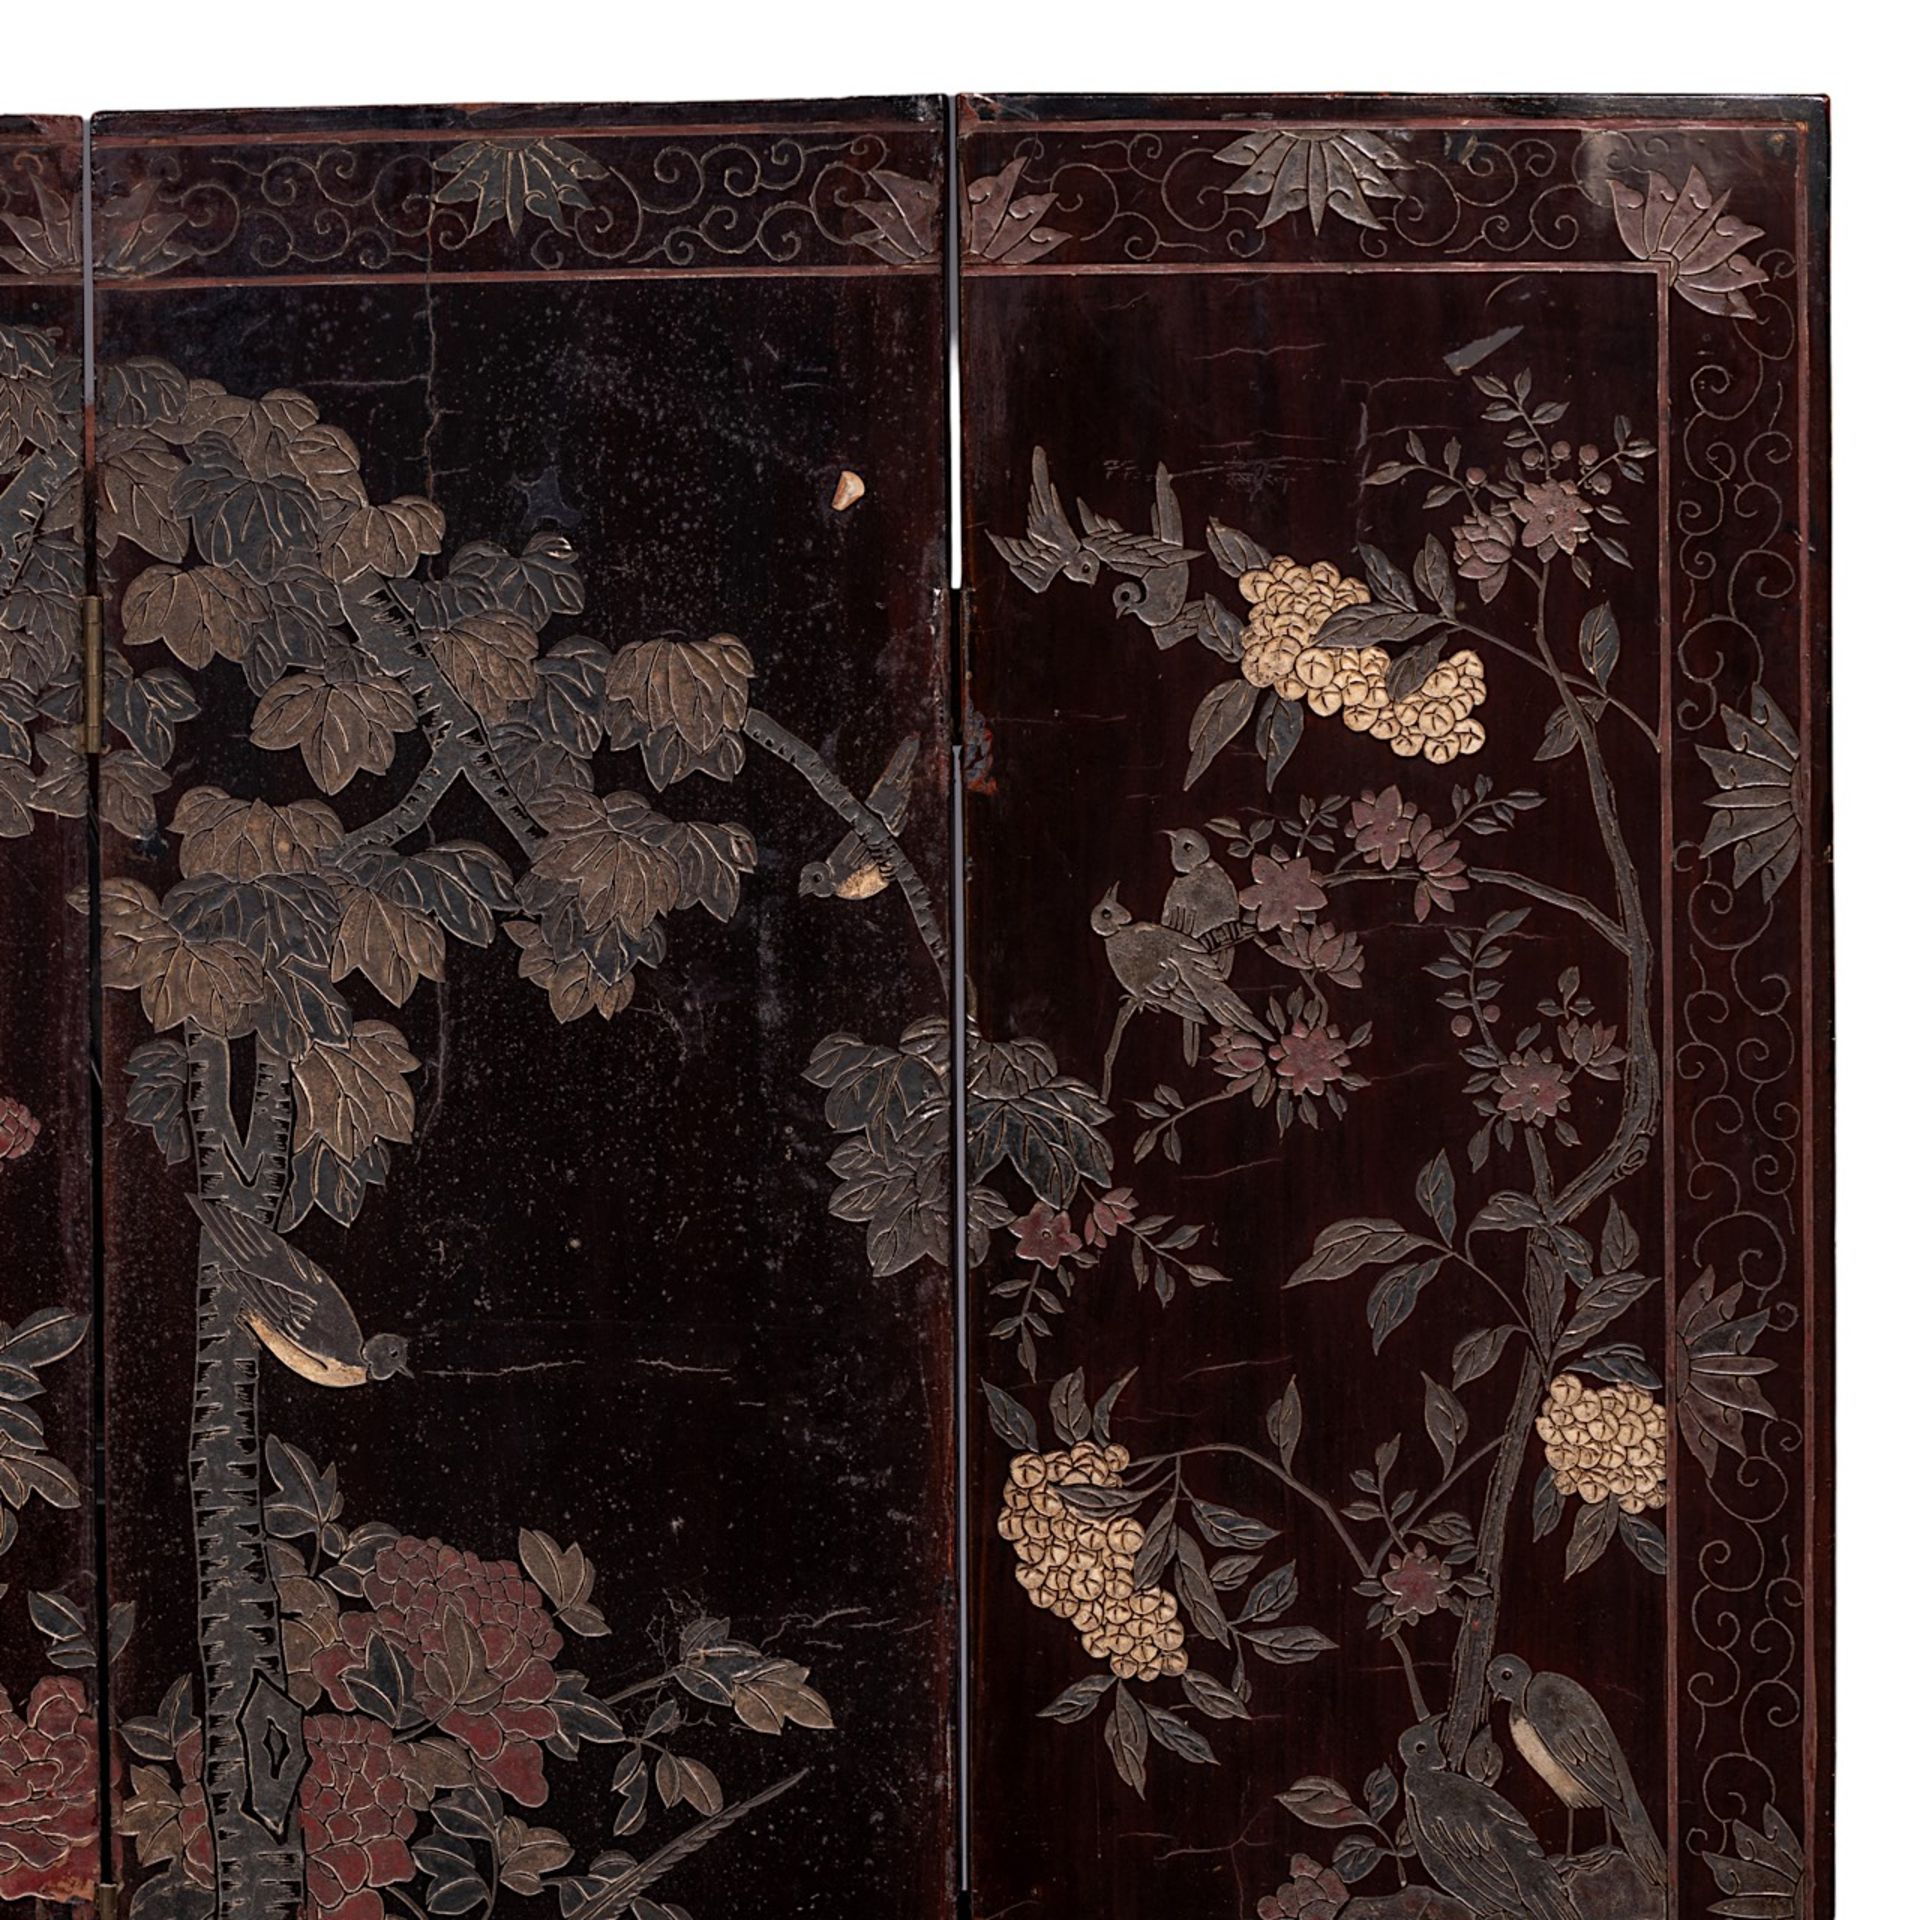 A Chinese coromandel lacquered four-panel chamber screen, late 18thC/19thC, H 162 - W 35,5 (each pan - Image 3 of 10